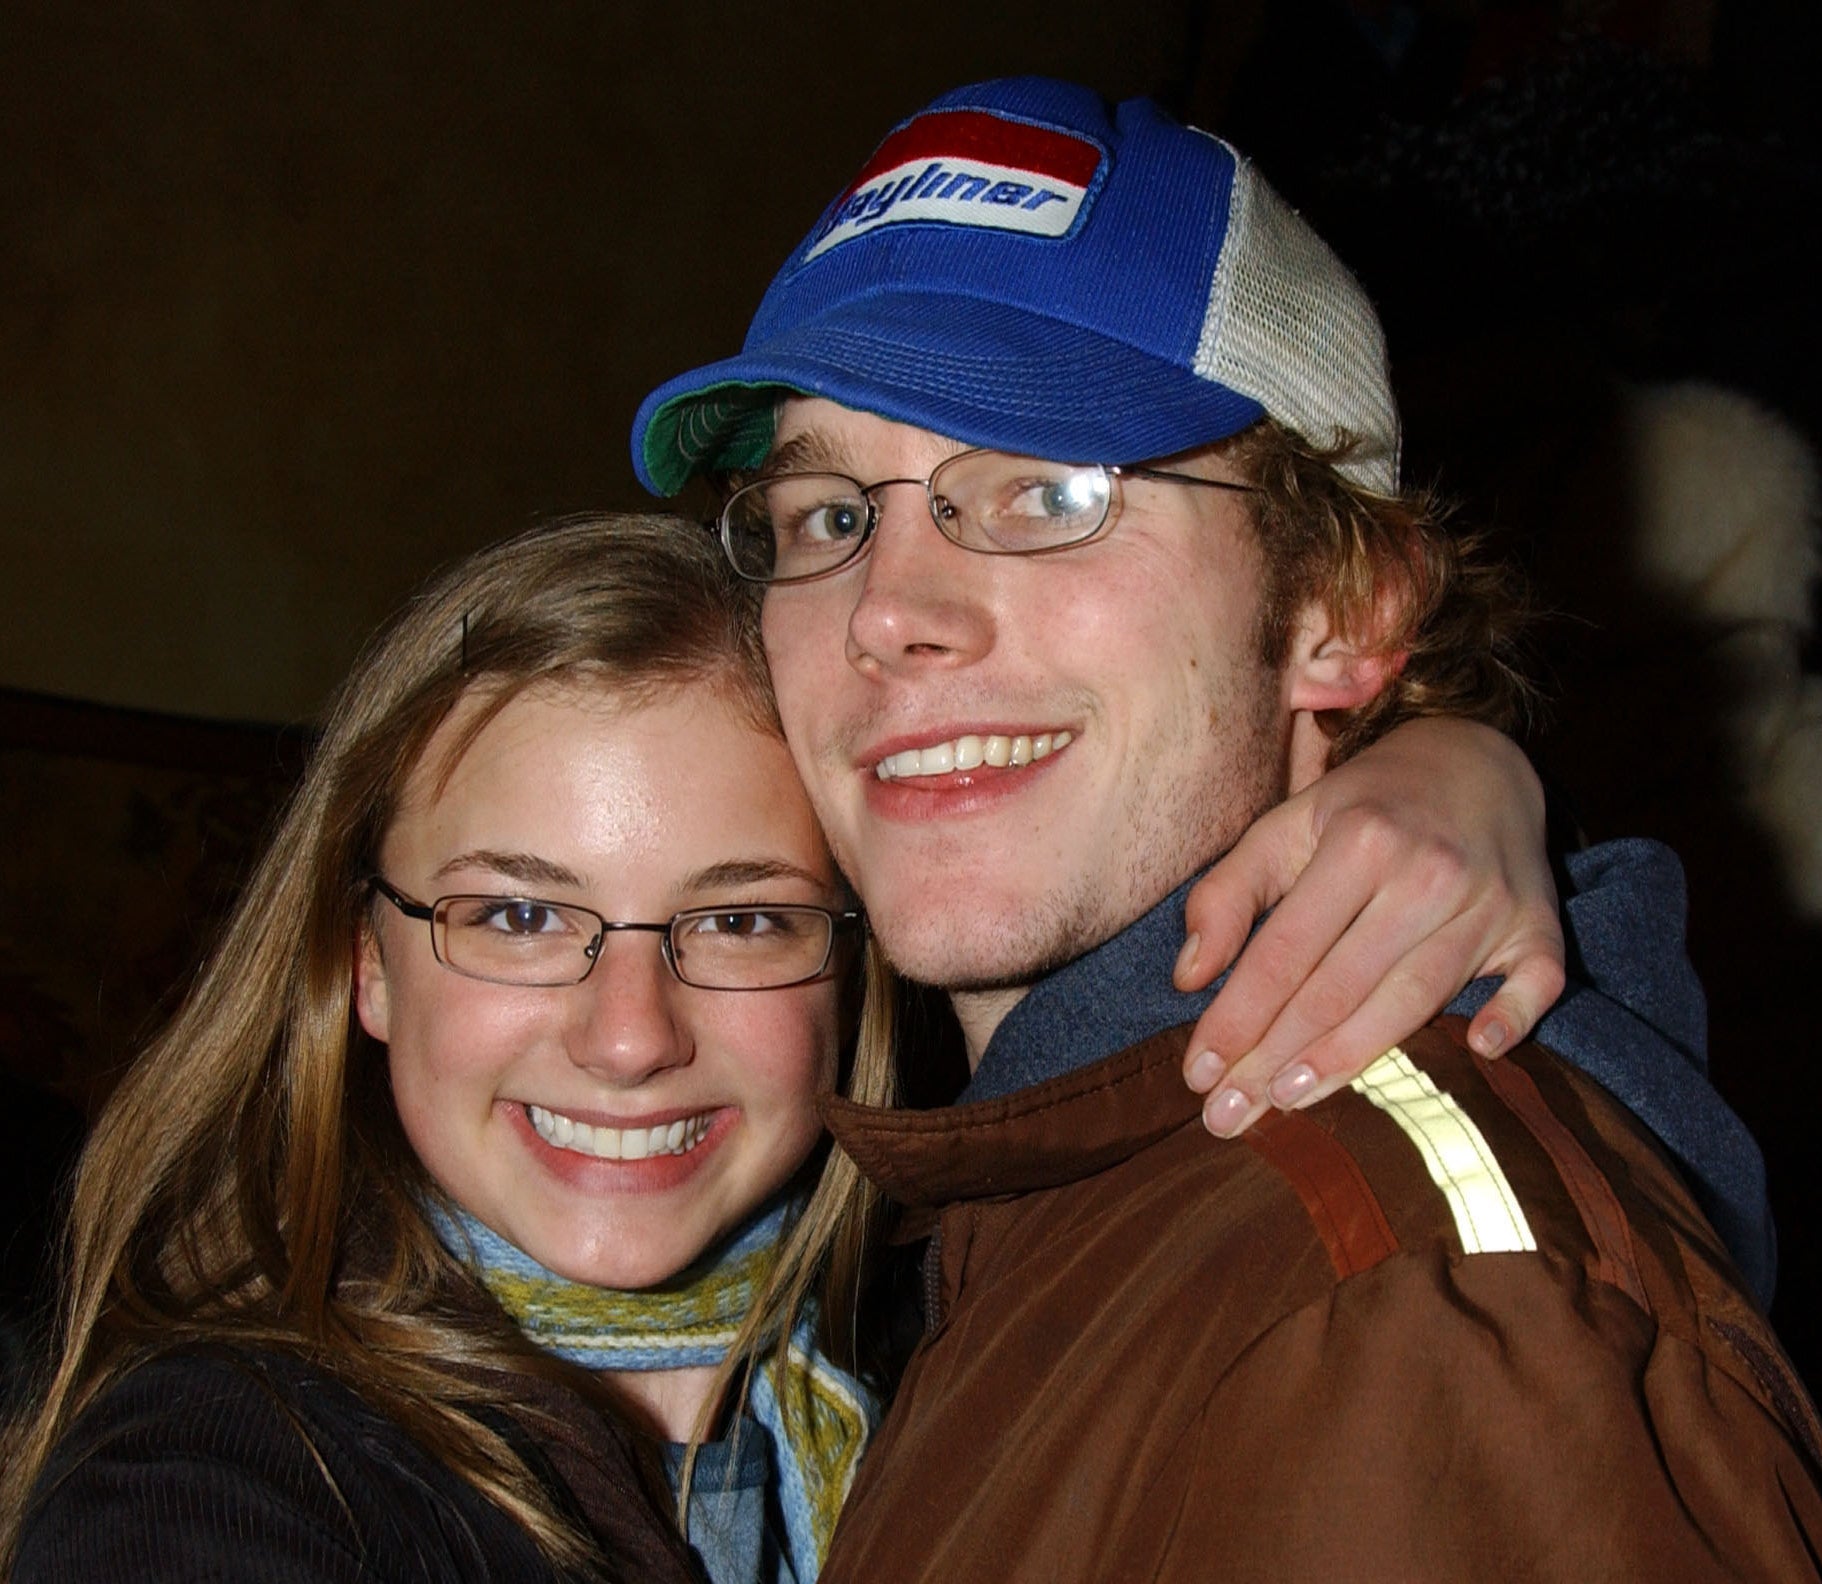 Emily VanCamp and Chris Pratt in the early 2000s